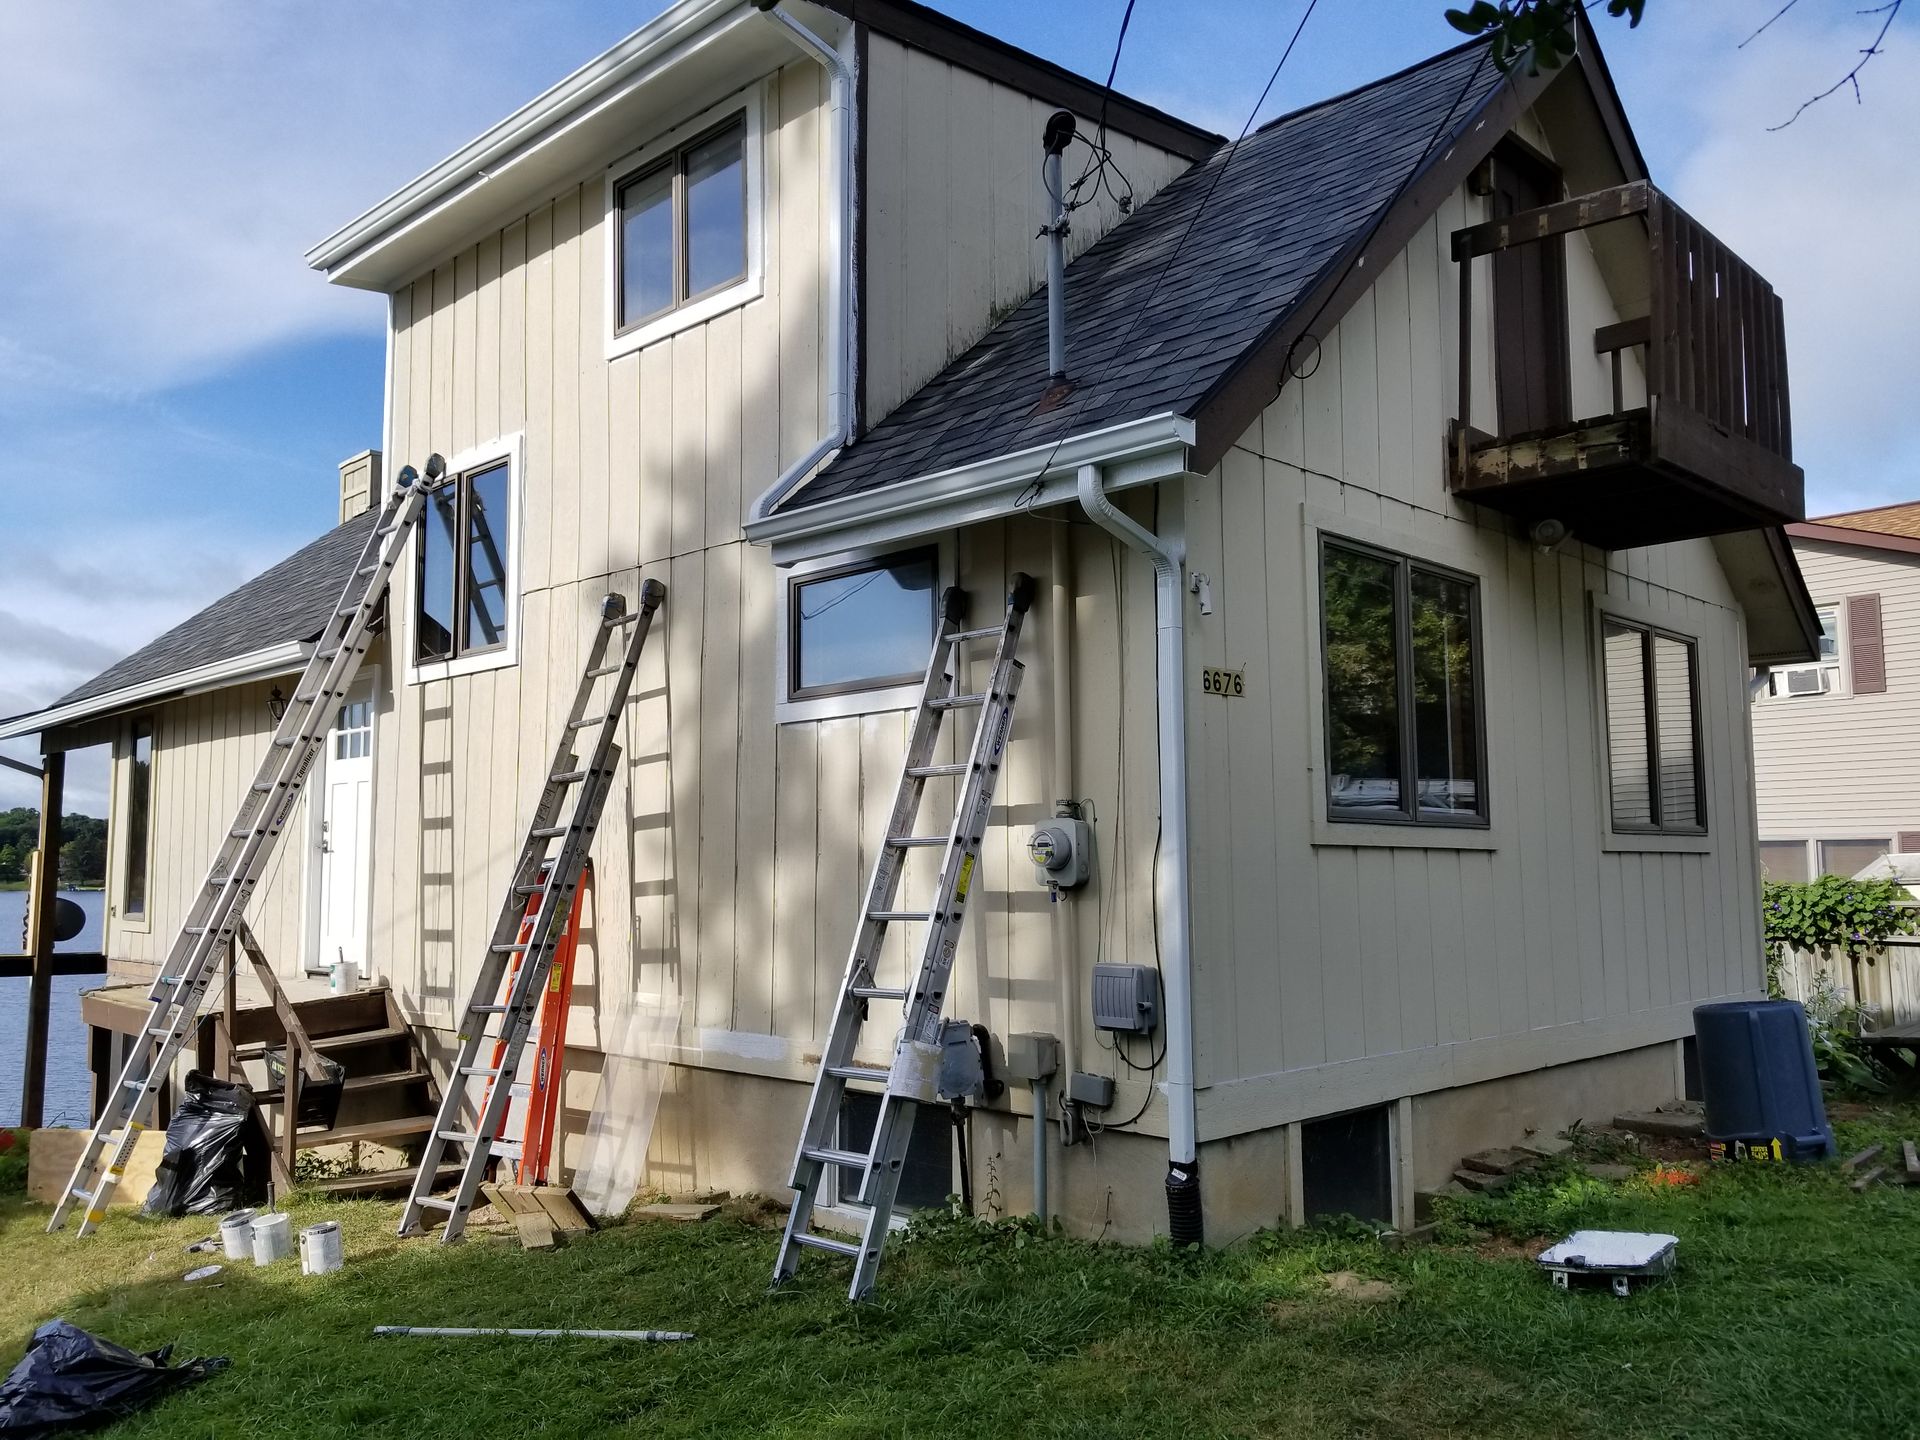 A house is being painted with ladders in front of it.